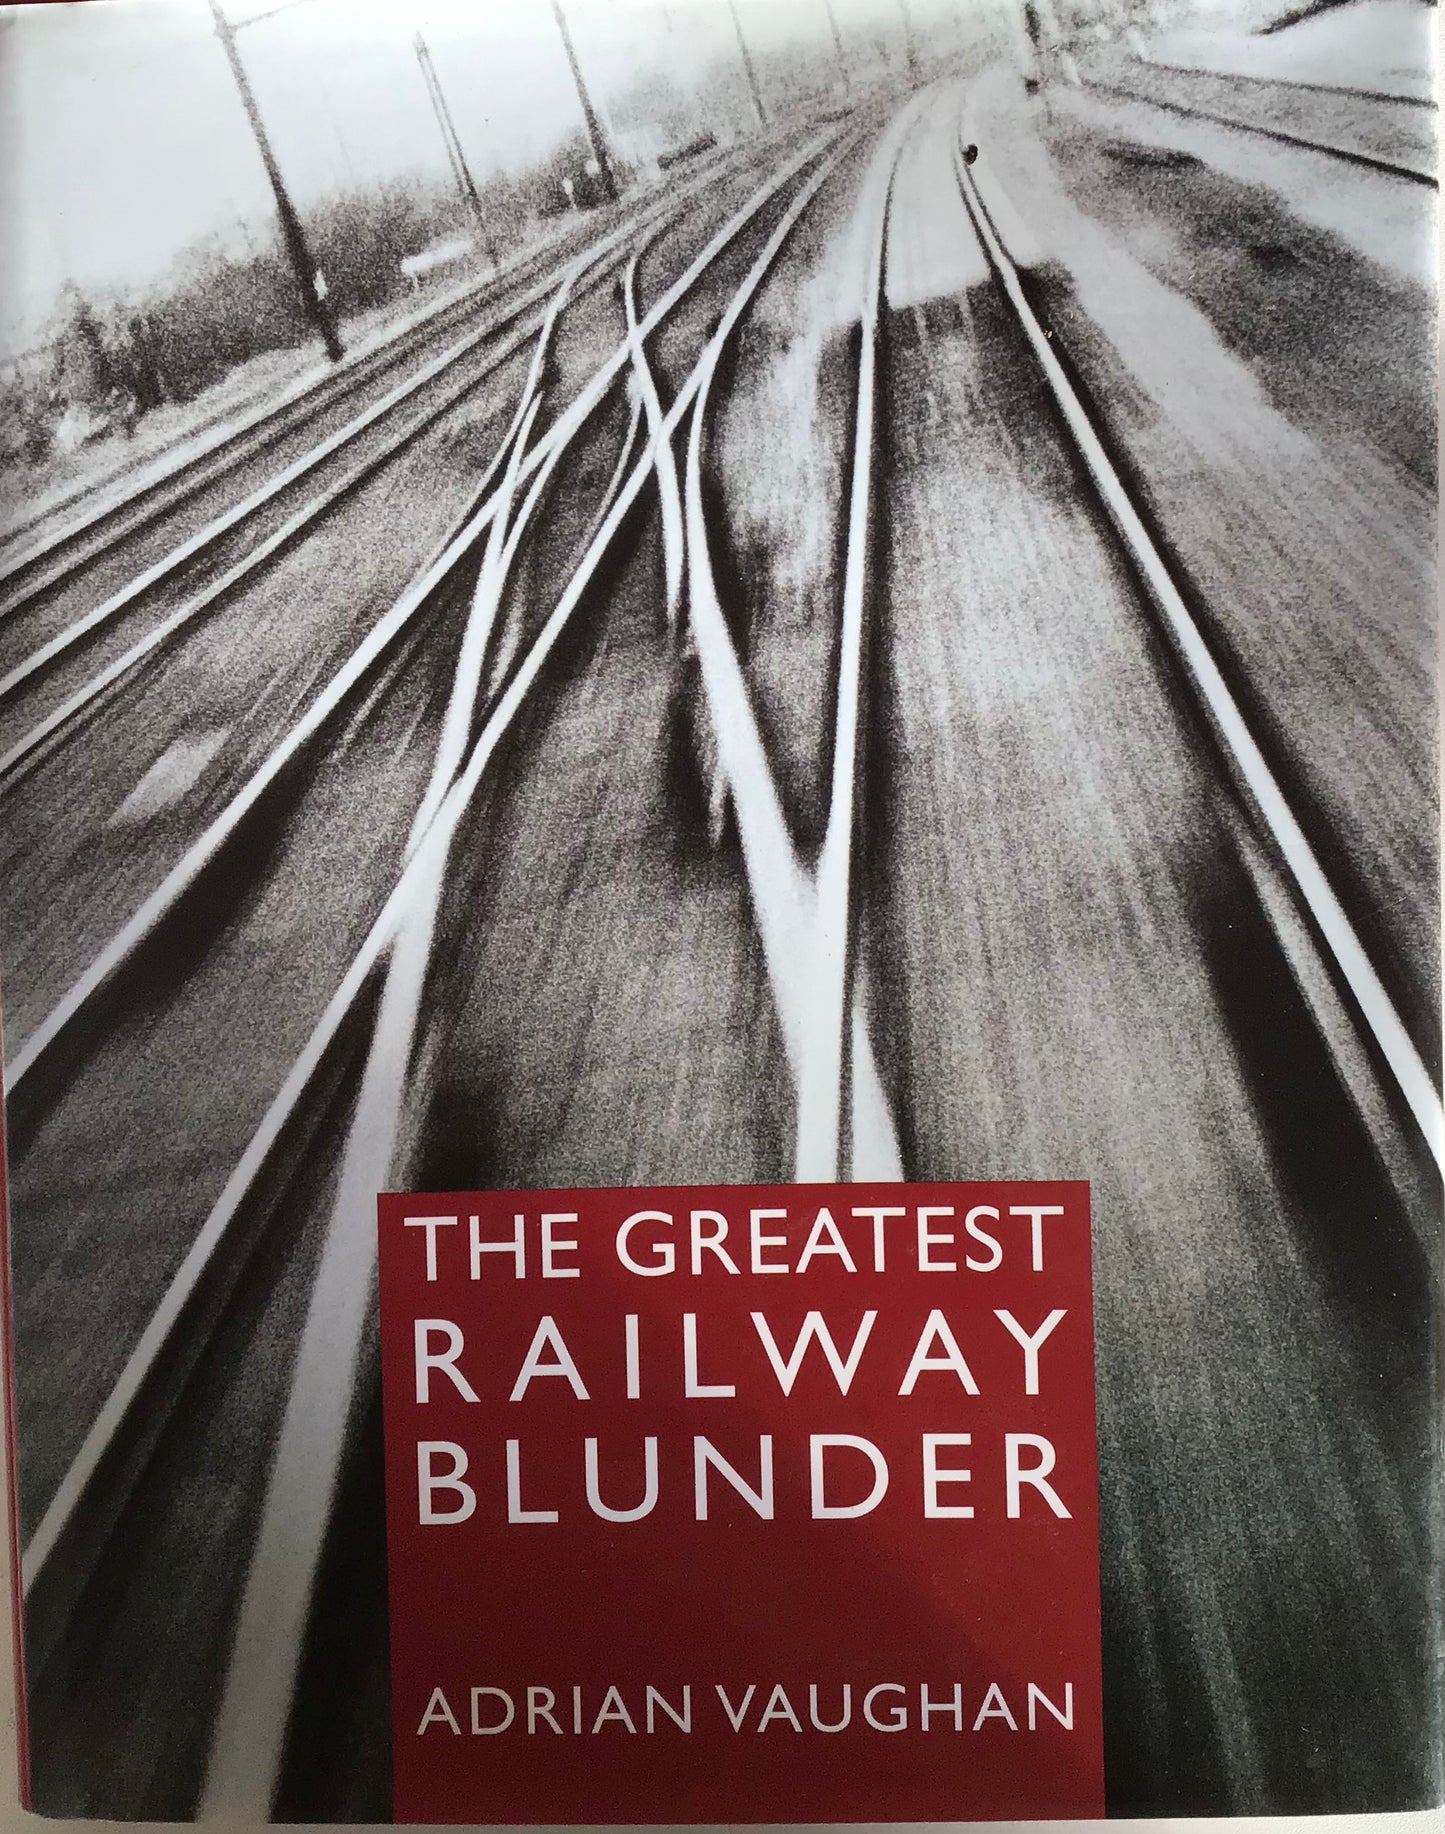 The Greatest Railway Blunder - Adrian Vaughan - Chester Model Centre